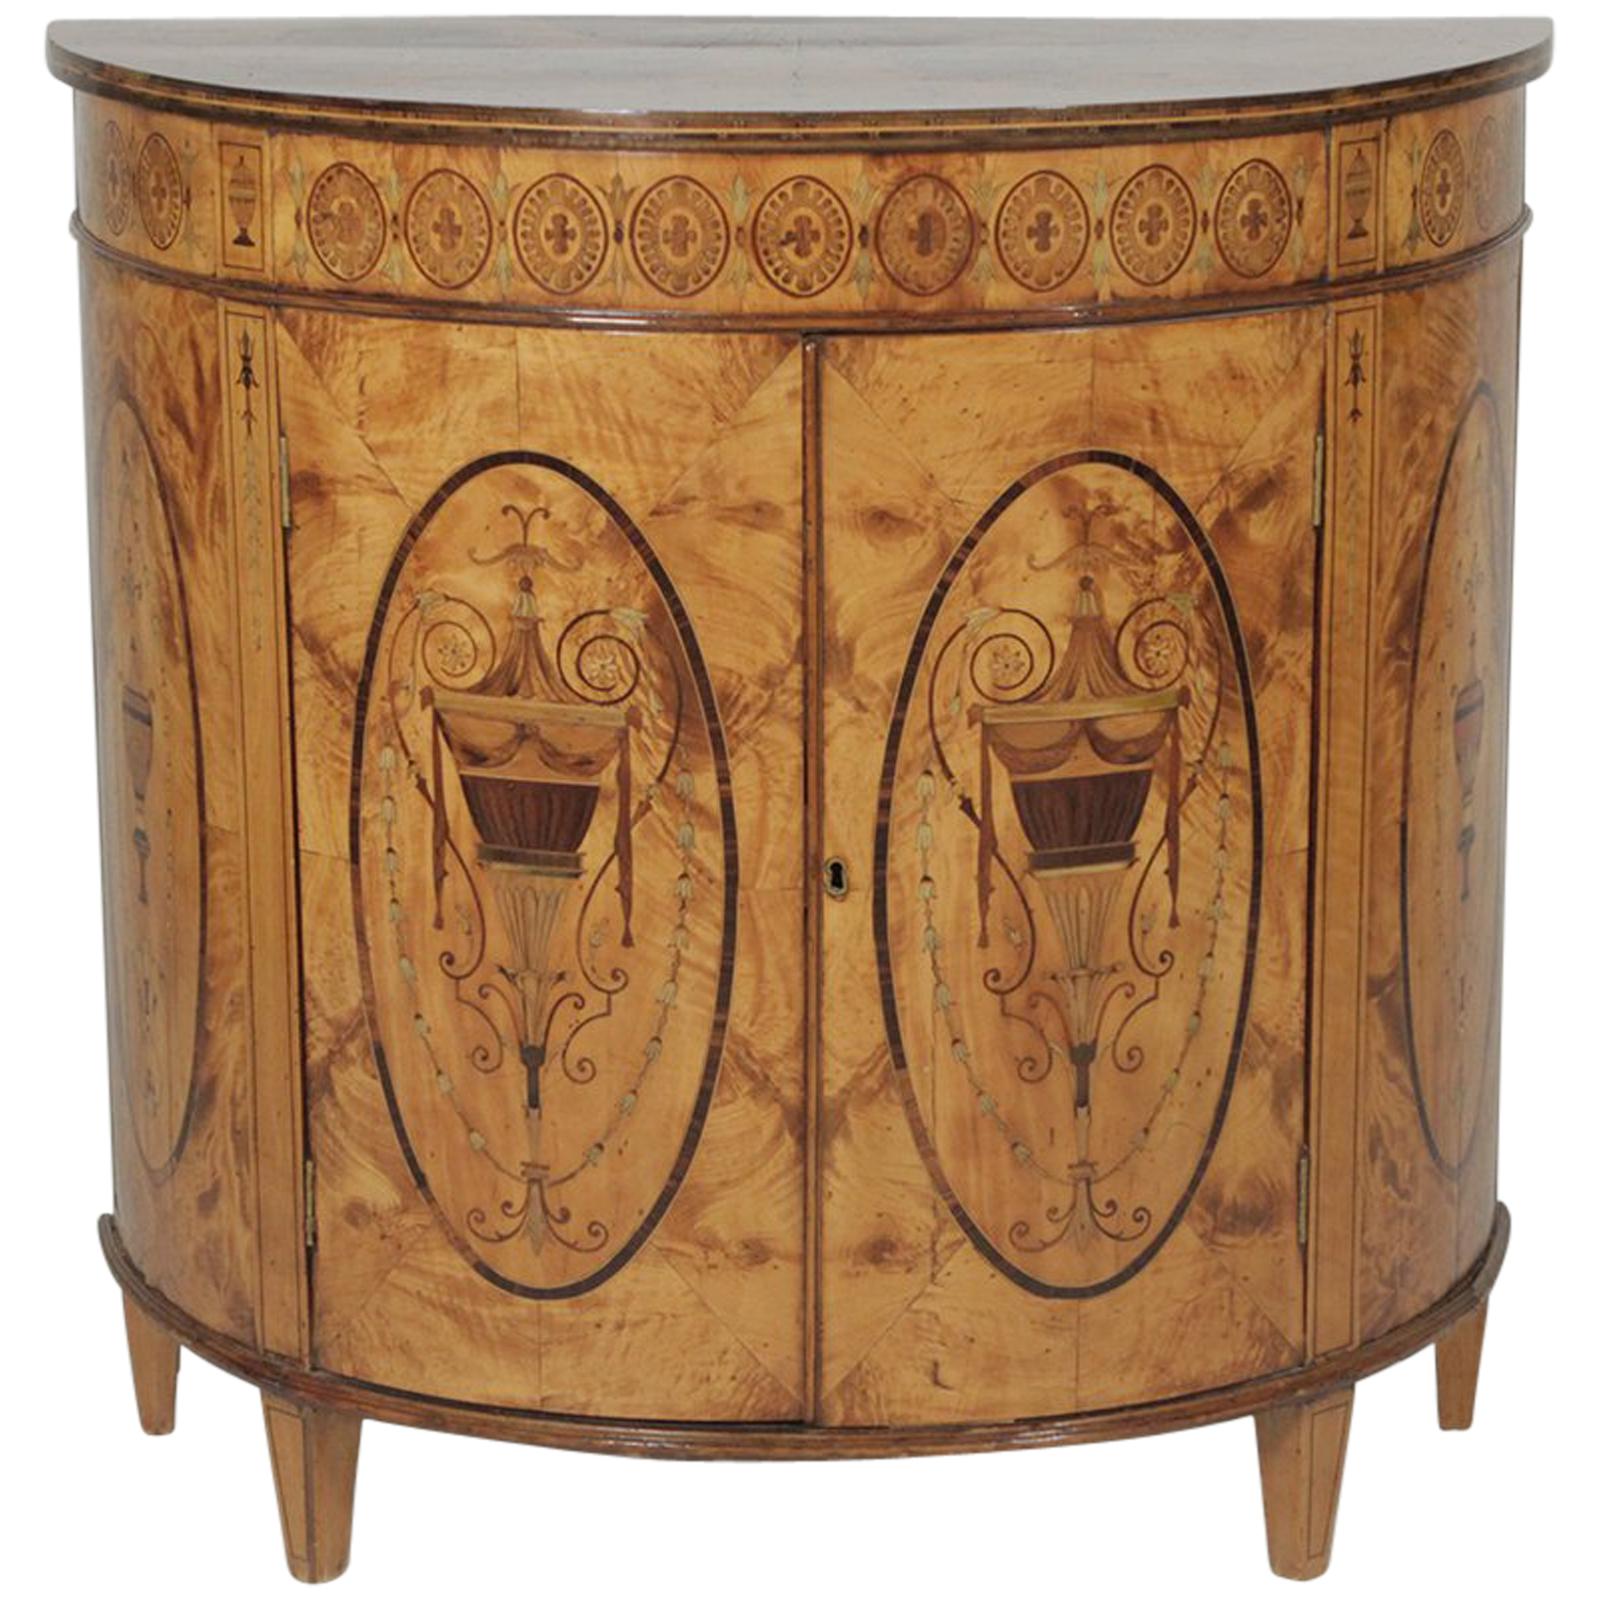 Exceptional Inlaid Early 19th Century Inlaid Commode Demi Lune